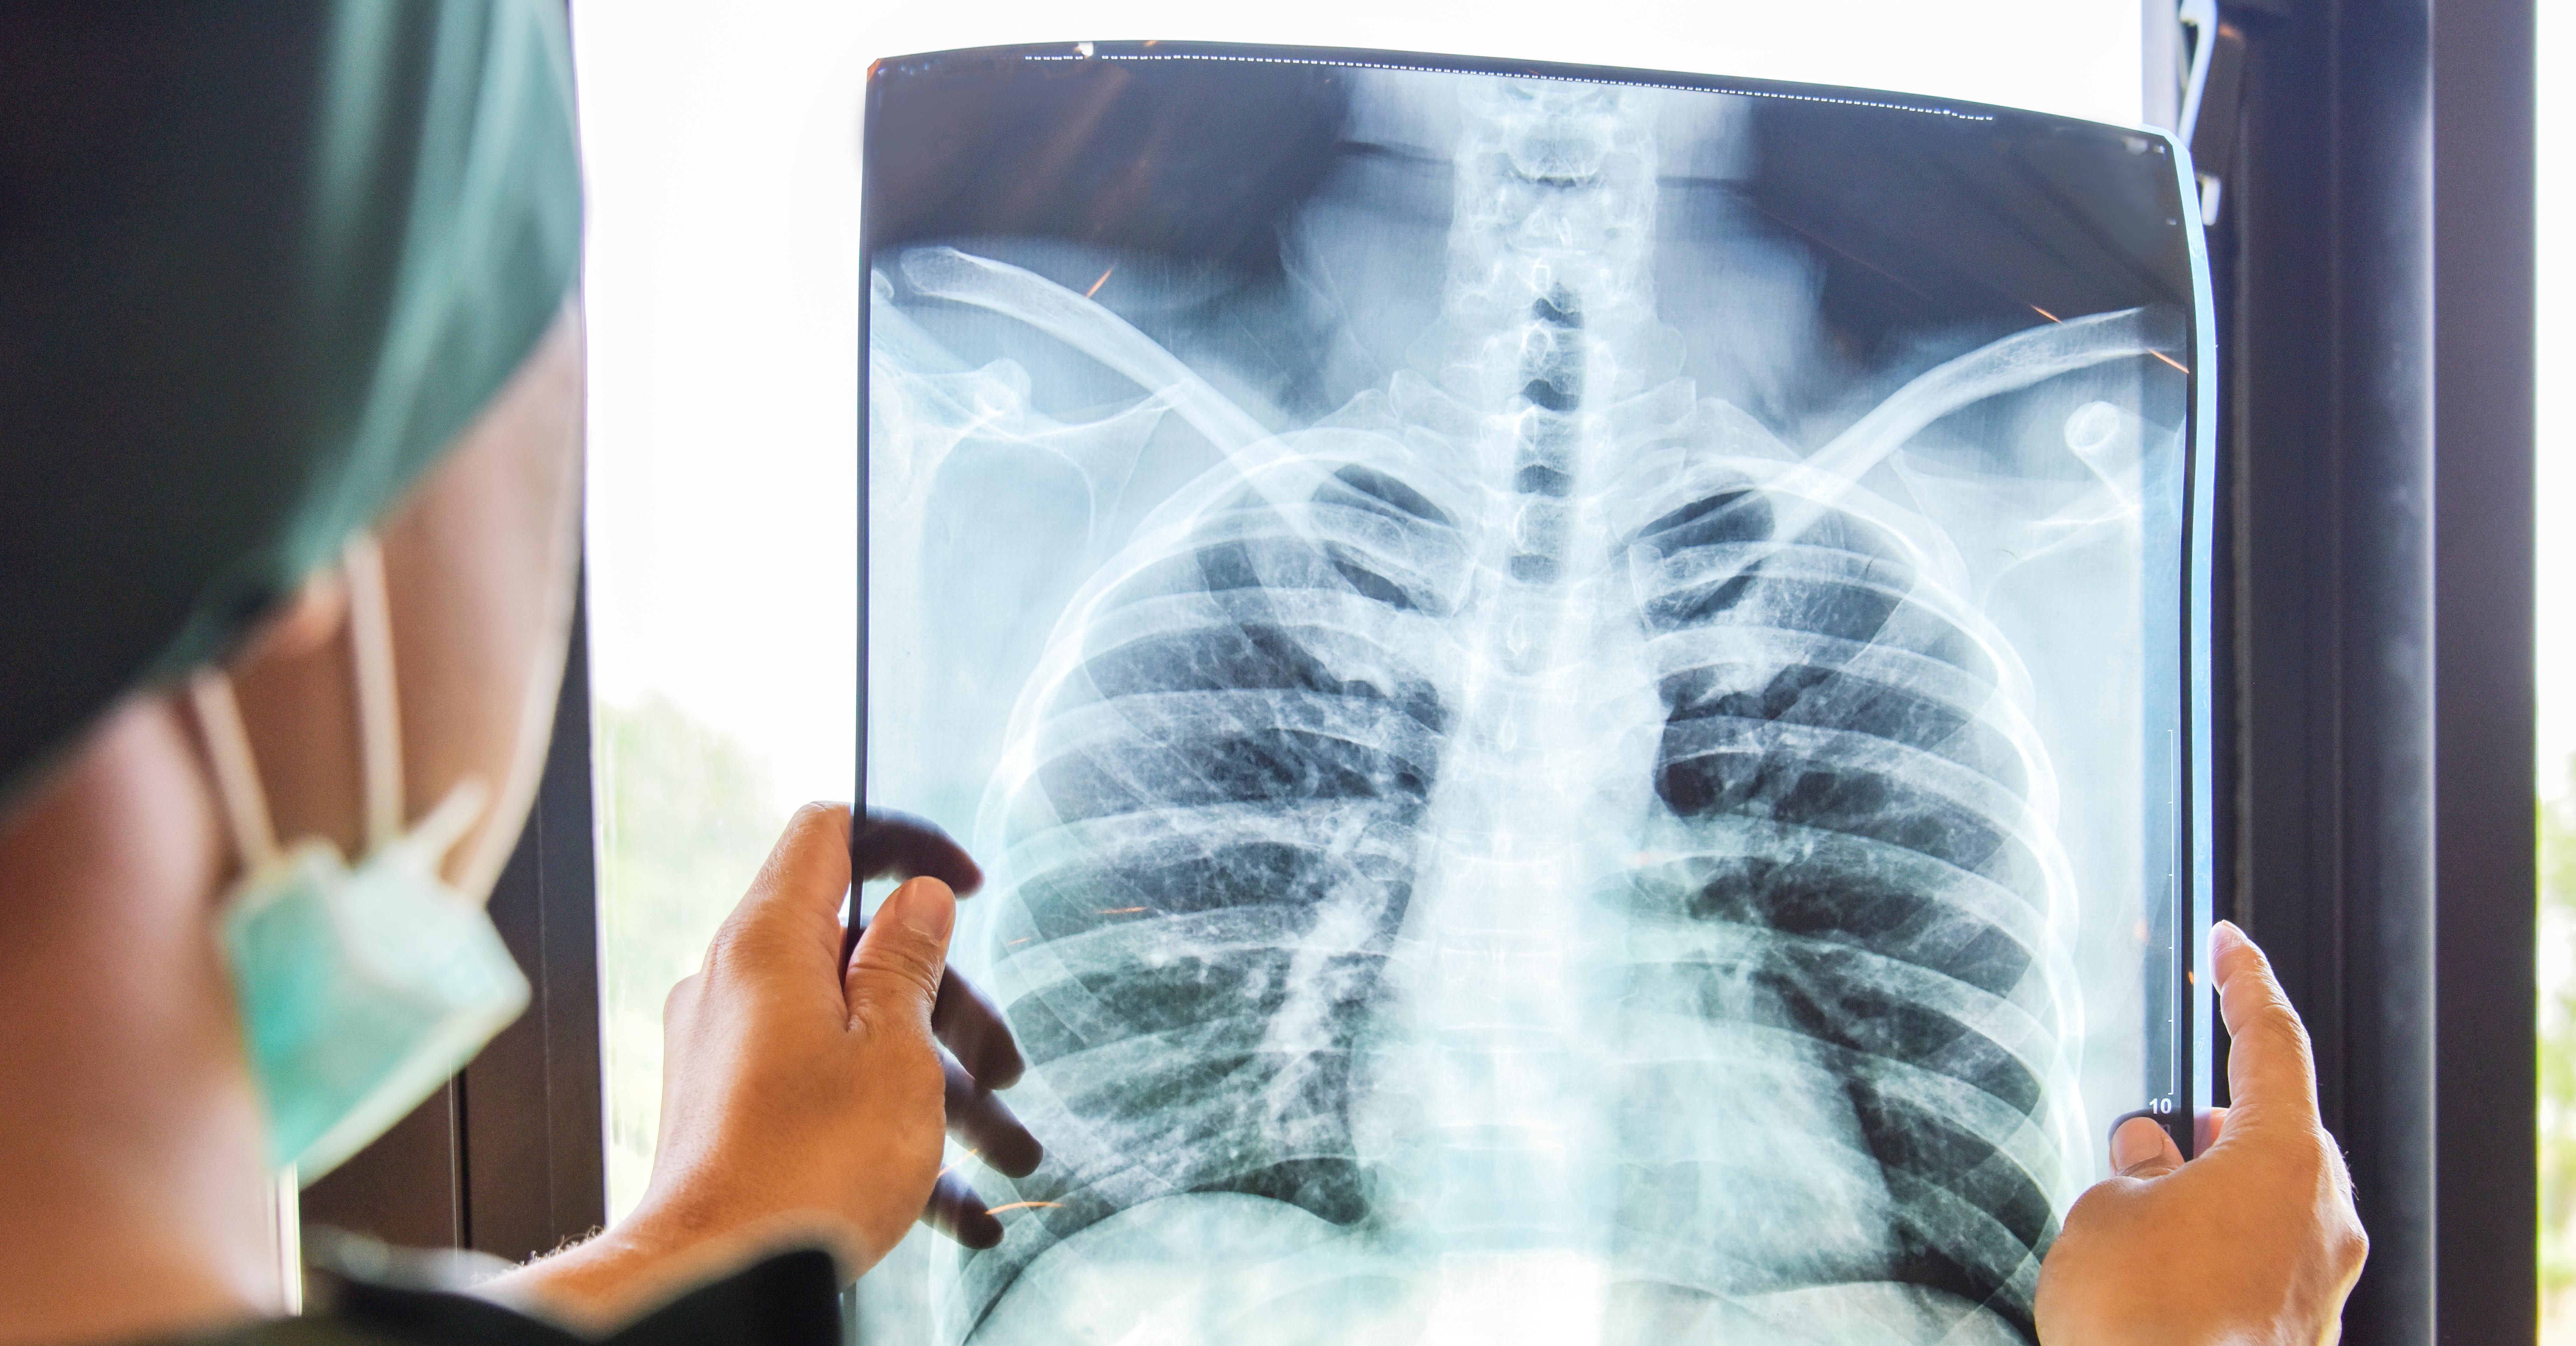 Predicting survival: Chest X-rays provide vital insight for hospitalized COVID-19 patients